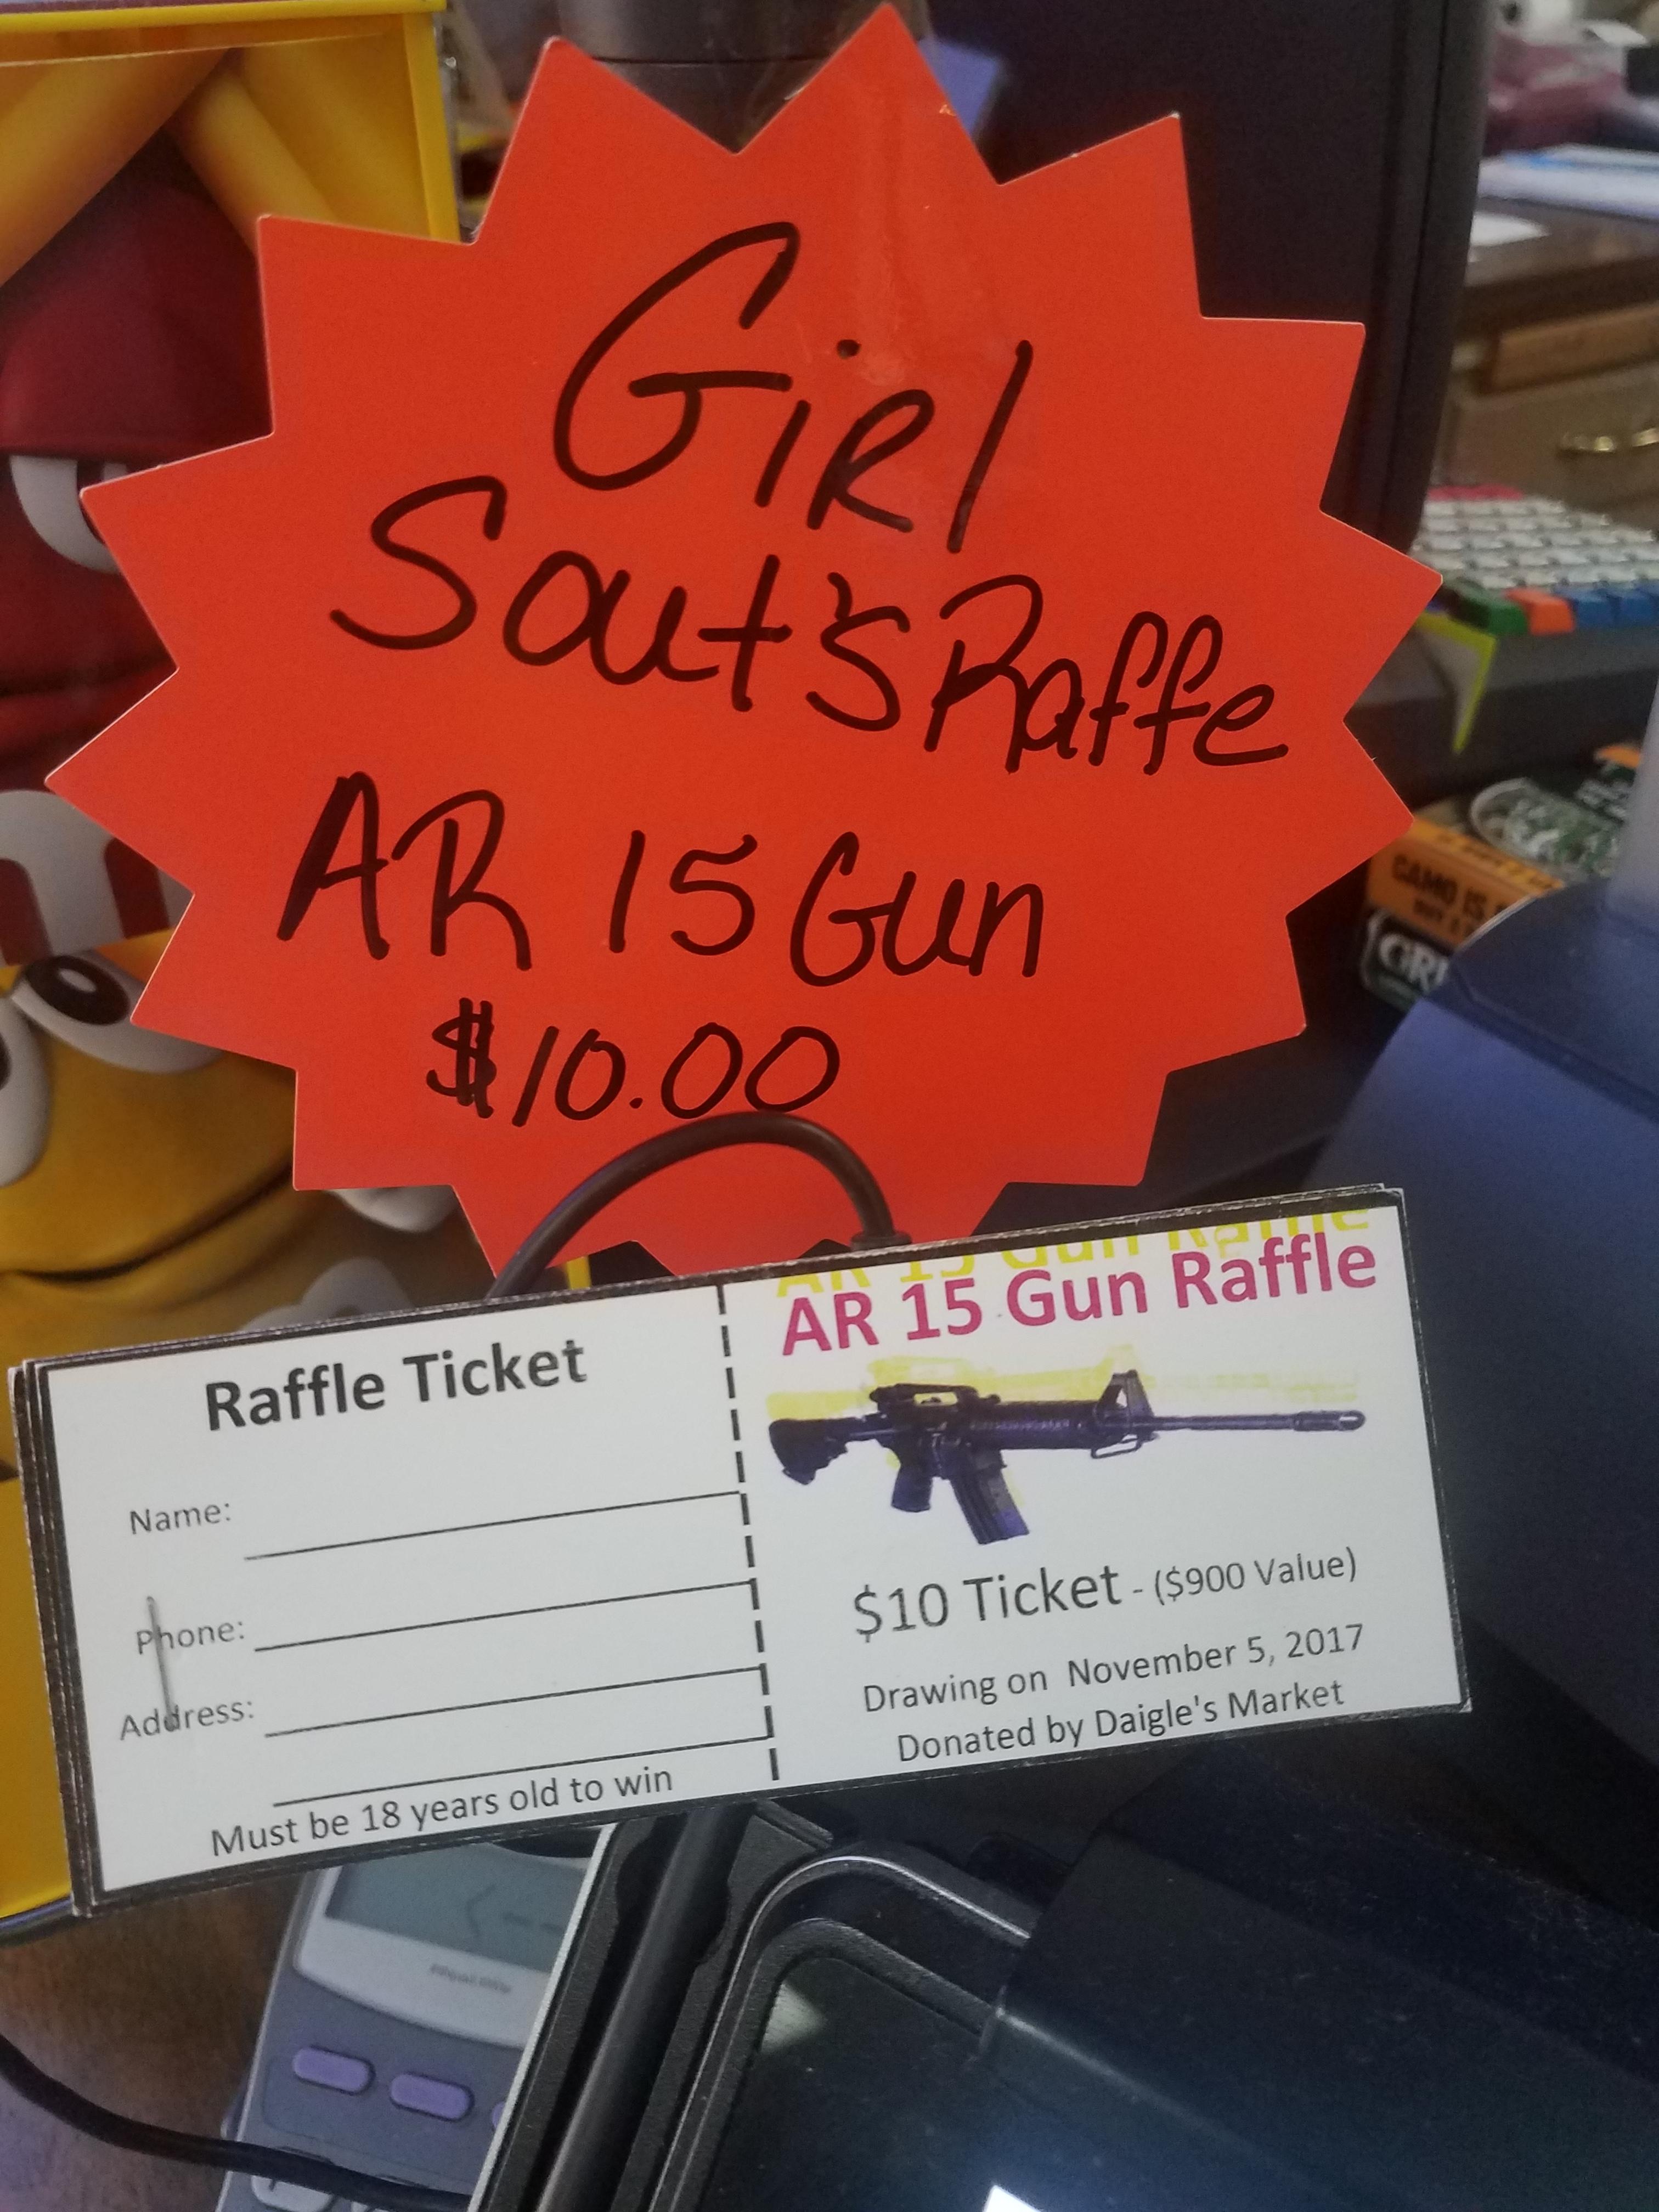 Girl Sout's Raffe Ar 15 Gun $10.00 Ar 15 Gun Raffle Raffle Ticket Na $10 Ticket 15900 Value Drawing on Donated by Daigle's Market Adress 1 Must be 18 years old to win